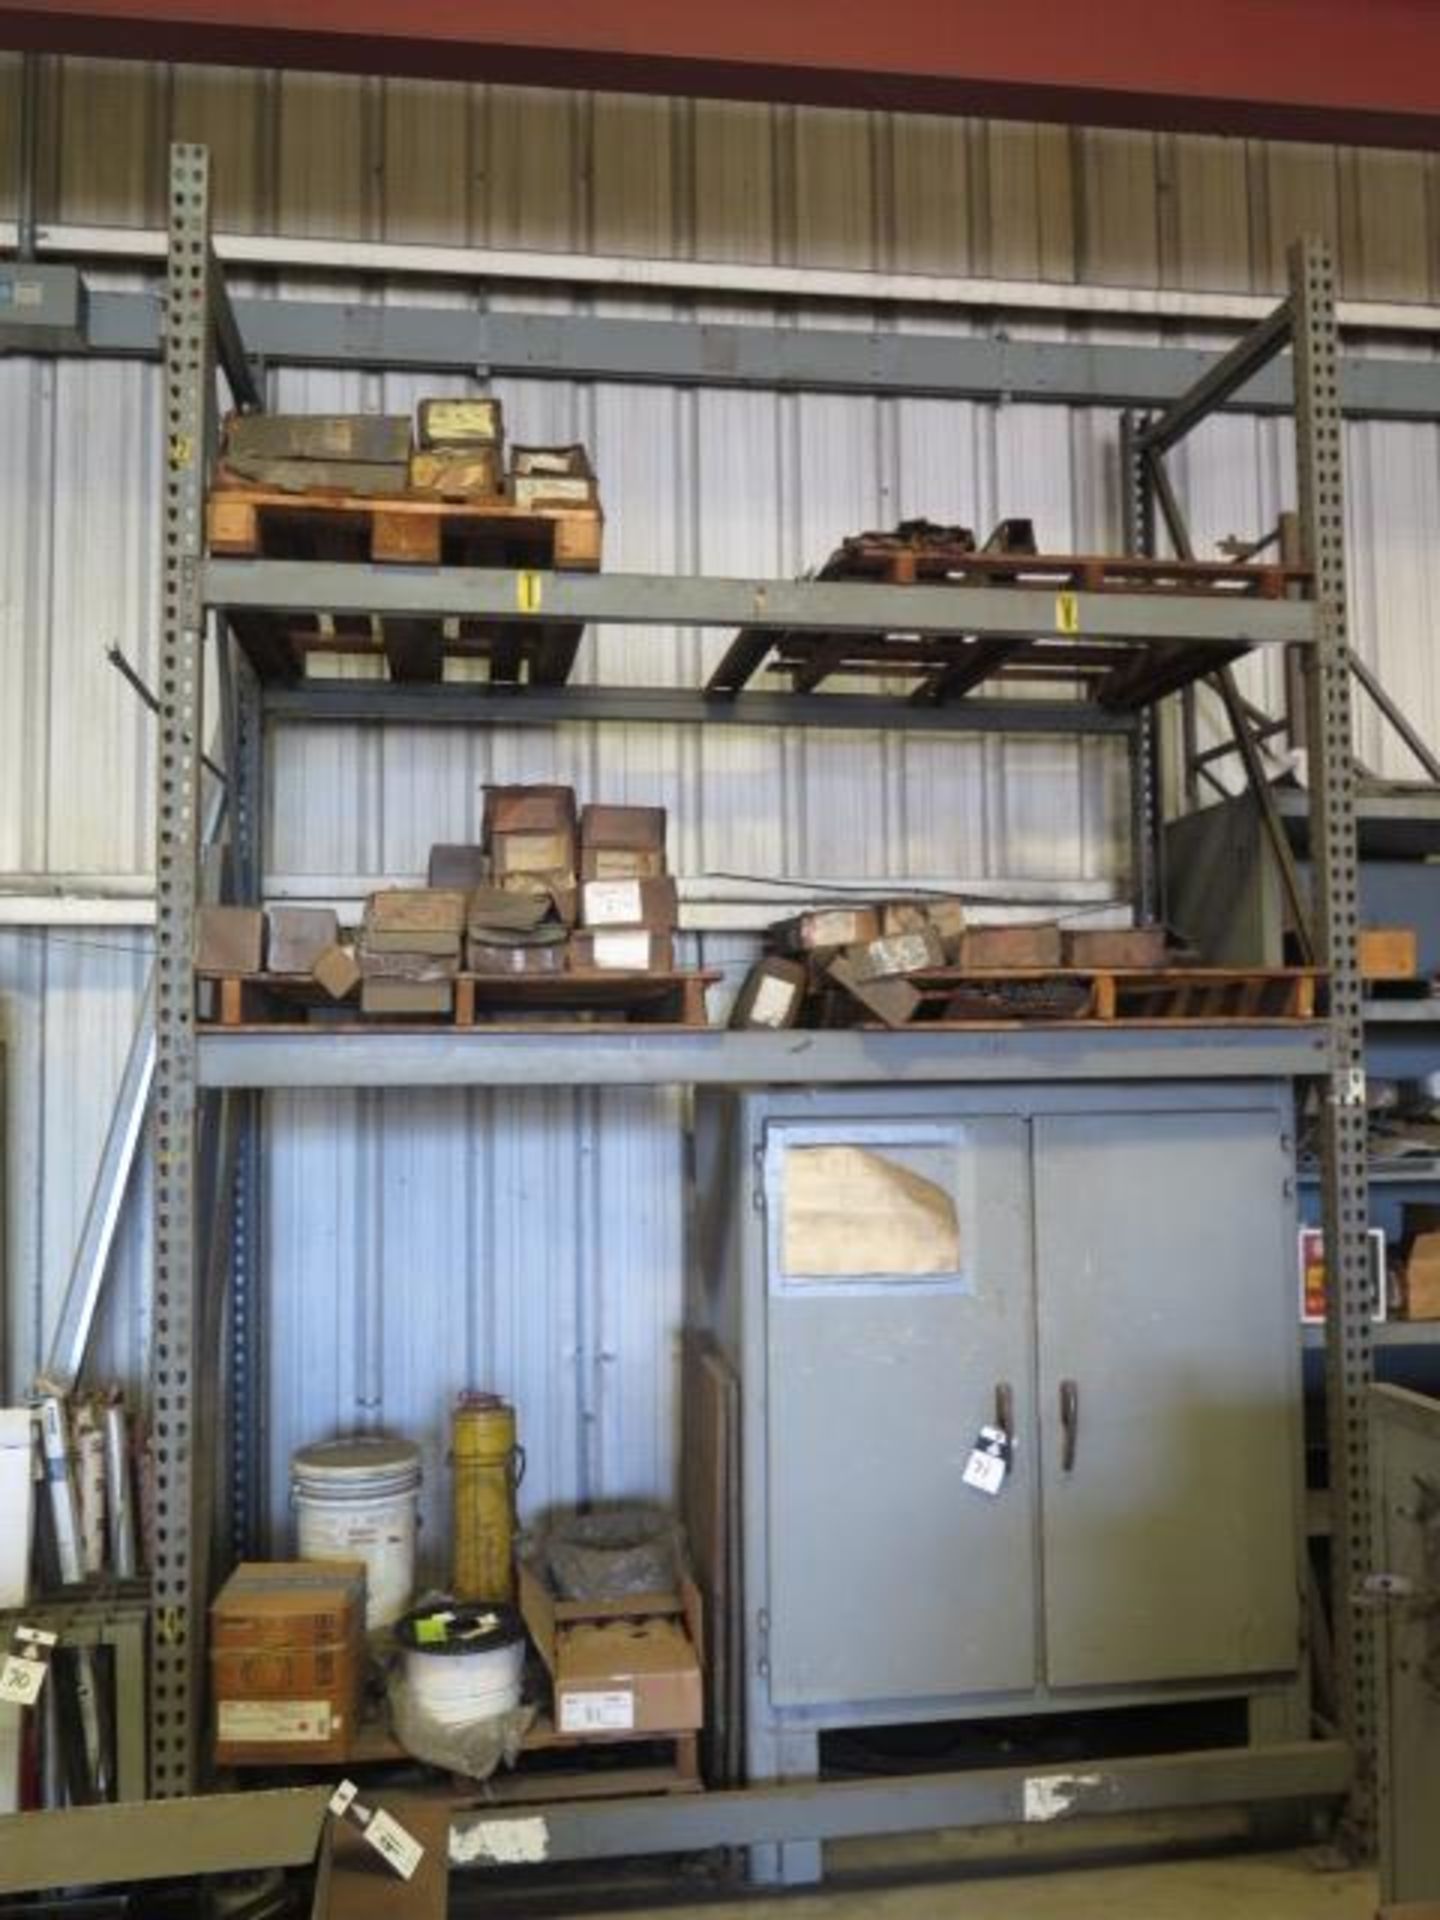 Welding Rod (5-Pallets) w/ Rack and Storage Cabinet (SOLD AS-IS - NO WARRANTY) - Image 2 of 10